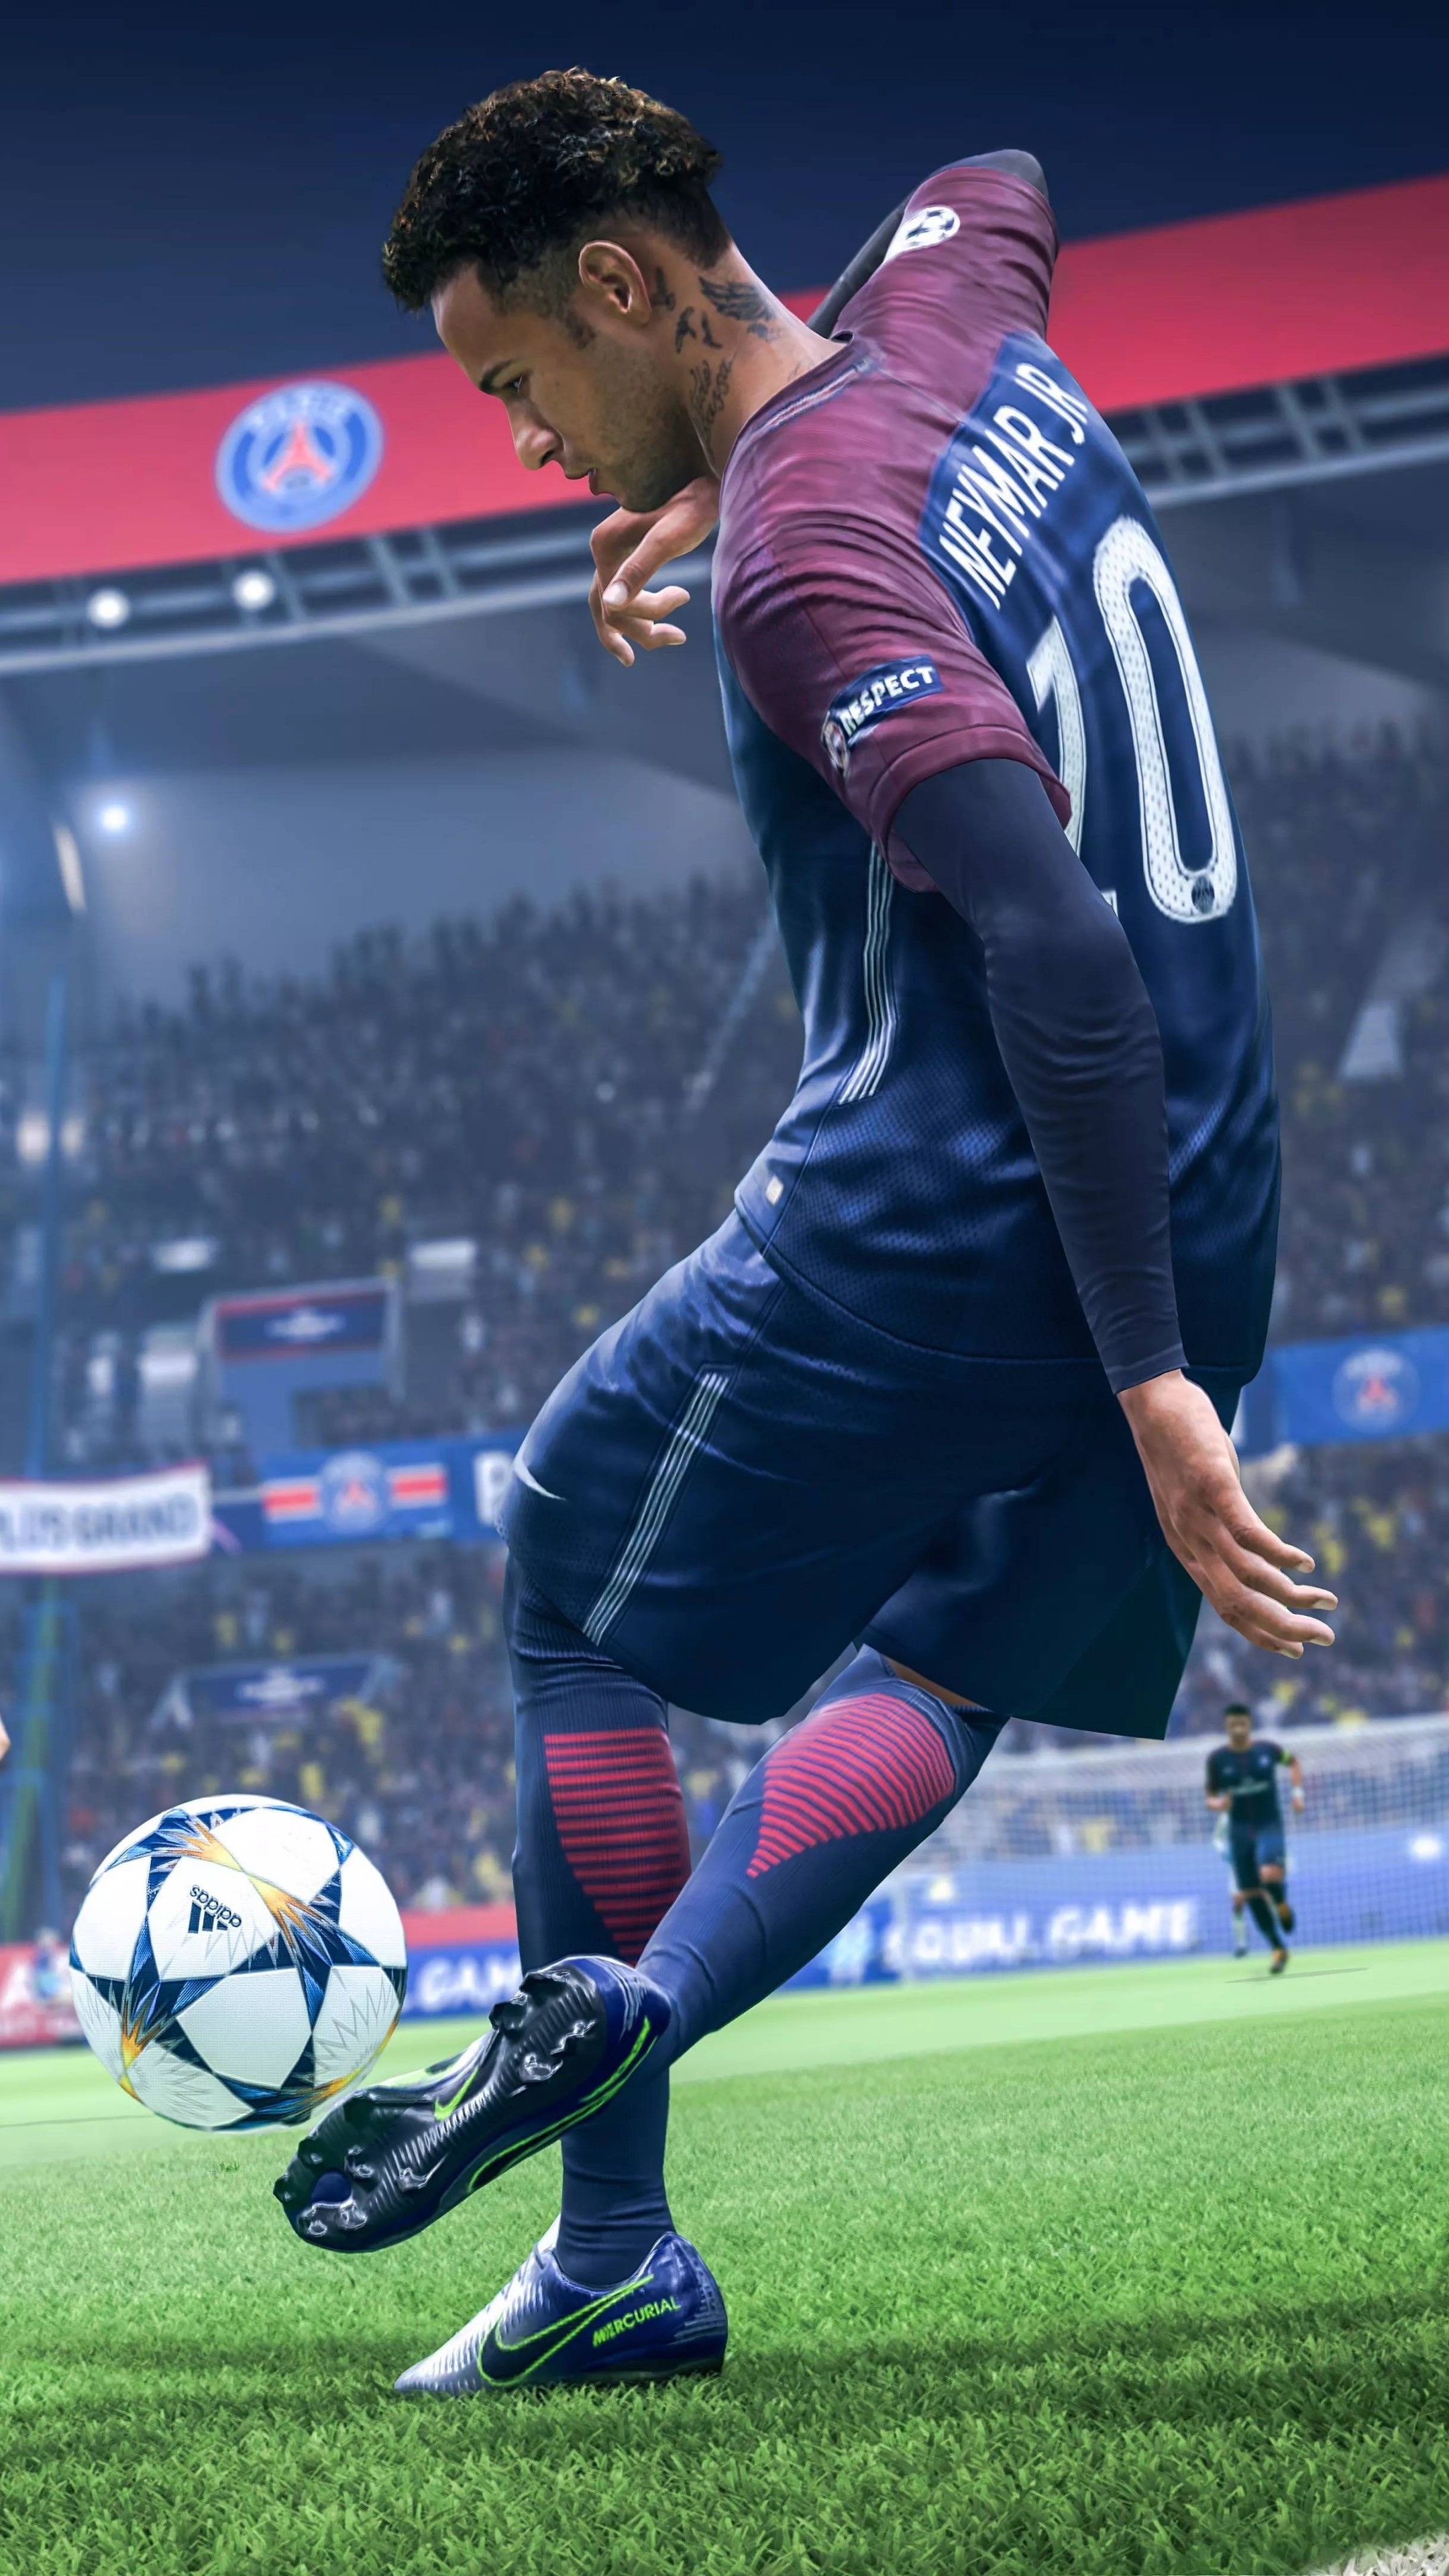 FIFA gaming championships, Epic sports moments, Dynamic gameplay, Crowd cheering, 2160x3840 4K Handy